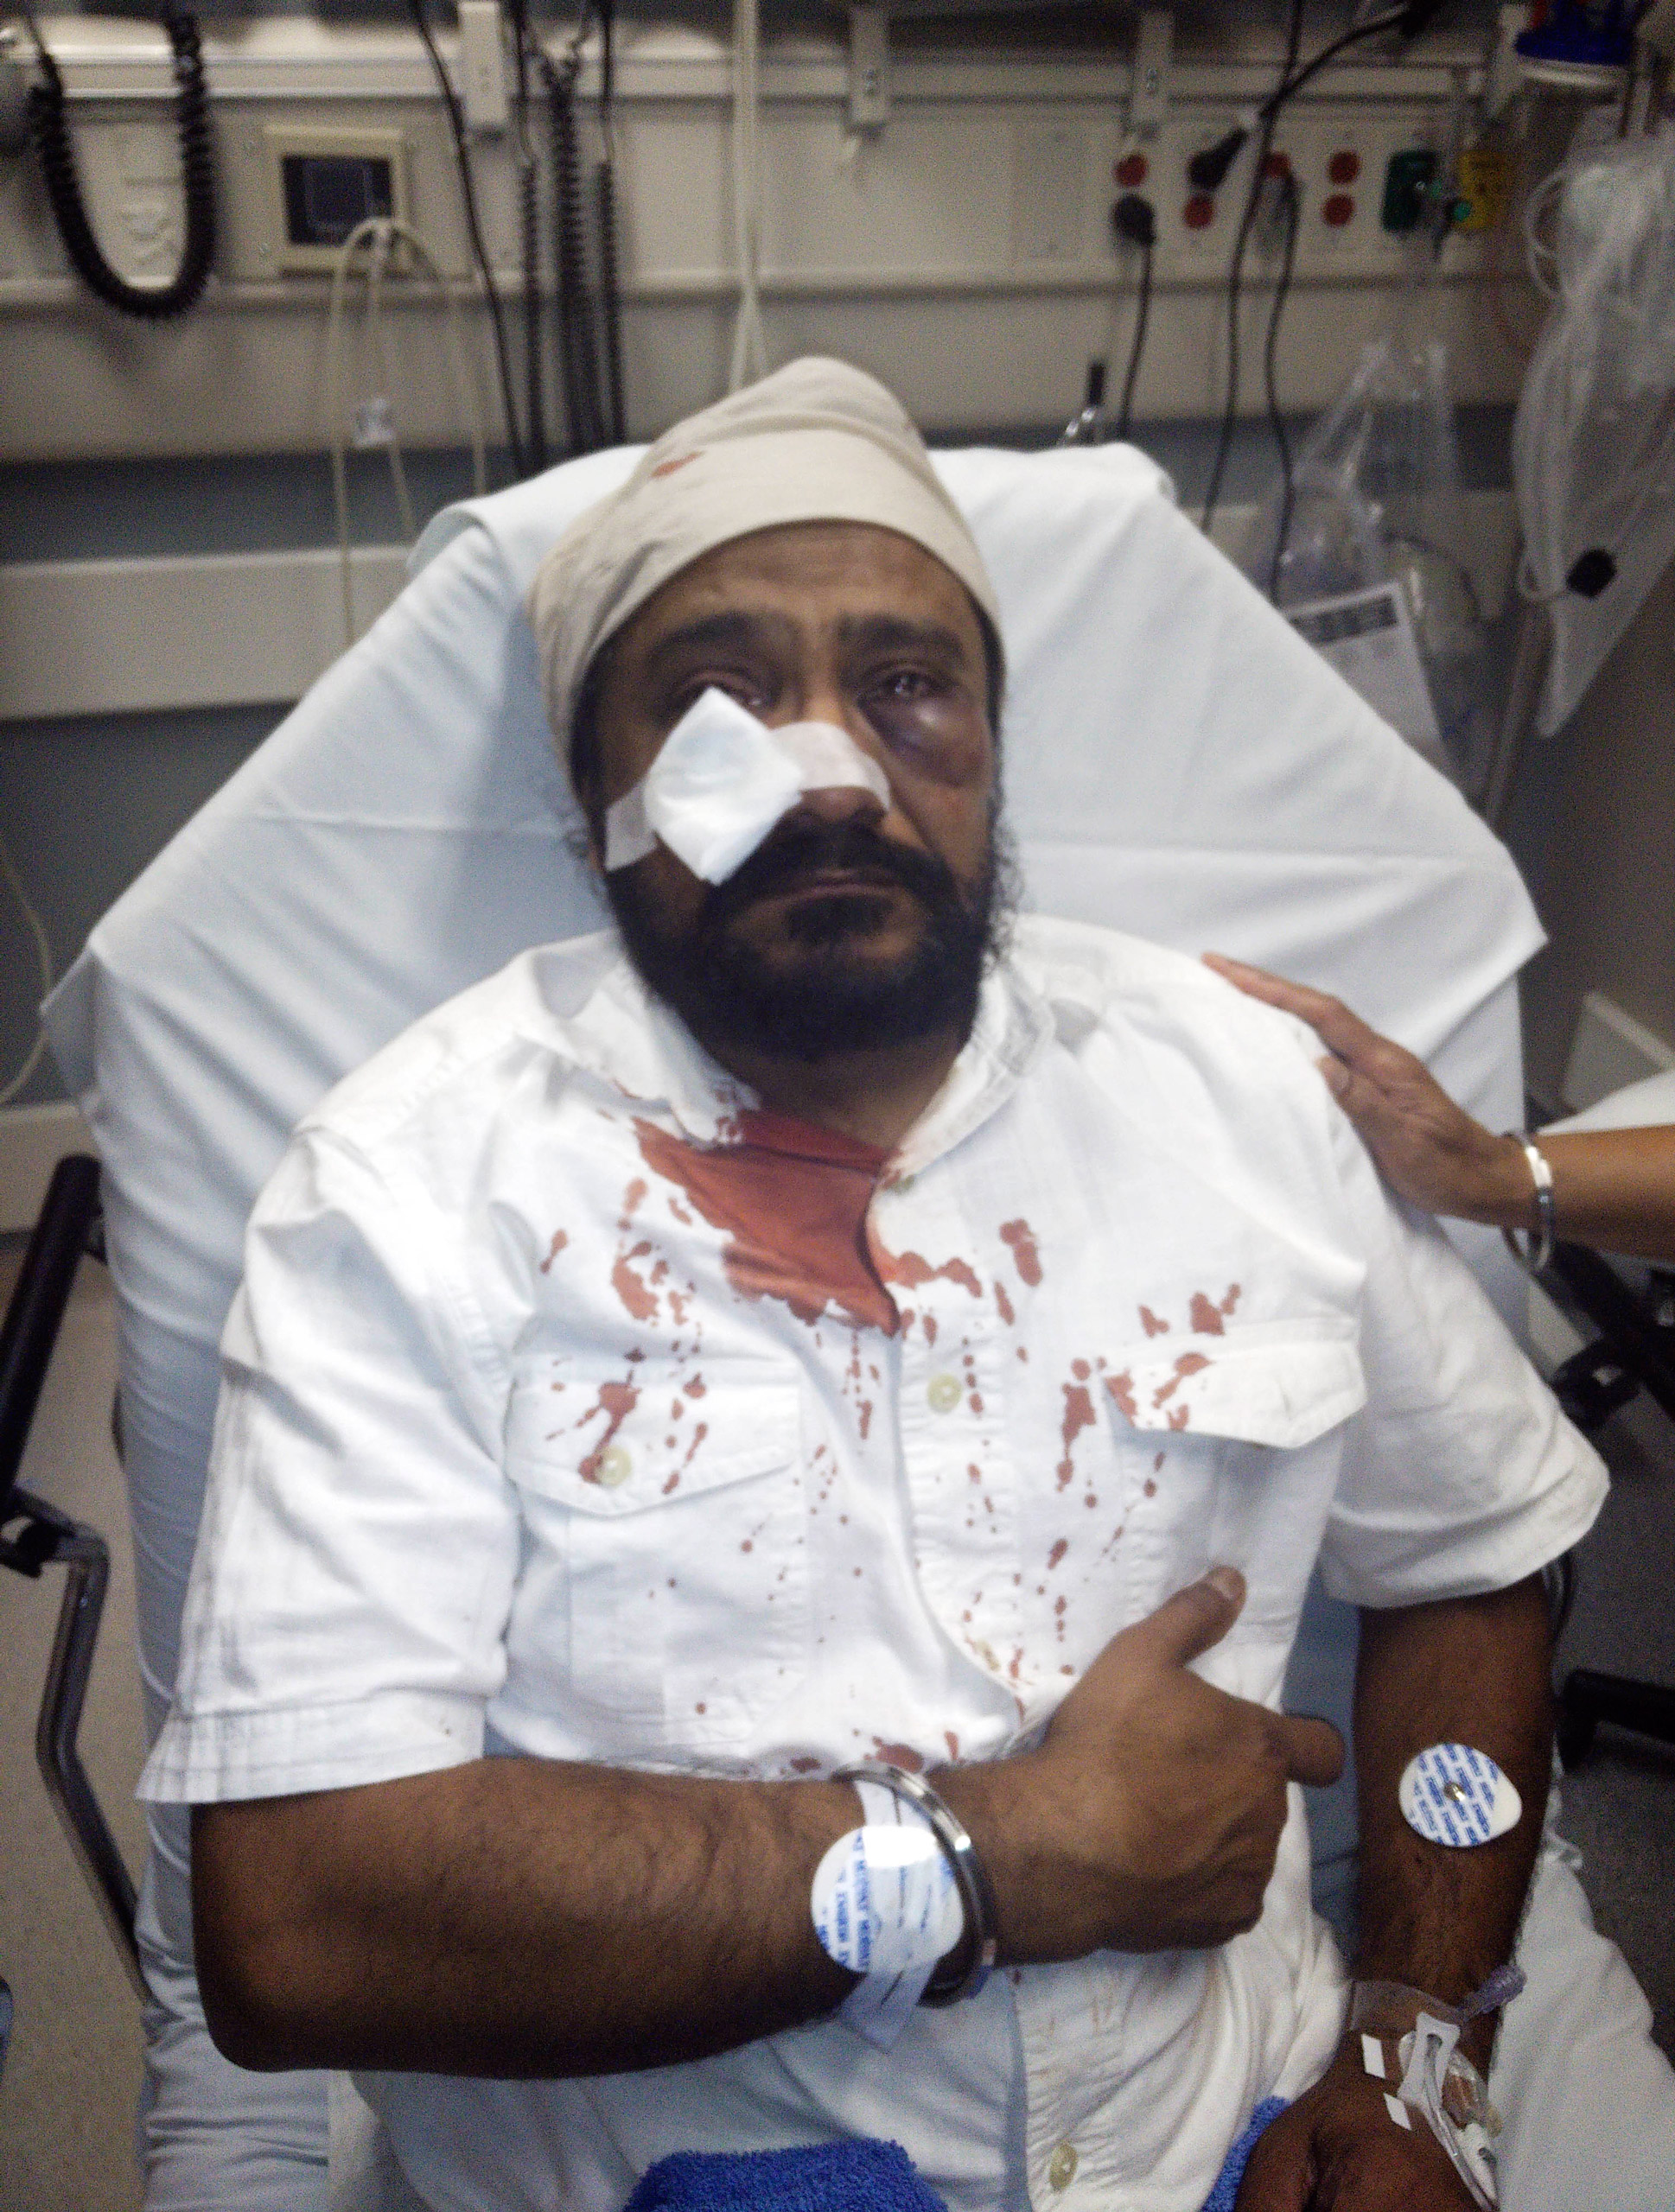 In this Sept. 8, 2015 photo provided by The Sikh Coaliton, 53-year-old Inderjit Mukker is seen at a hospital in Hinsdale, Ill., following an attack authorities say was a road rage incident in Darien, Ill. On Tuesday, Sept. 15, prosecutors said a suburban Chicago teenager who had already been charged with punching the Sikh man has now been charged with a hate crime. (The Sikh Coalition via AP)